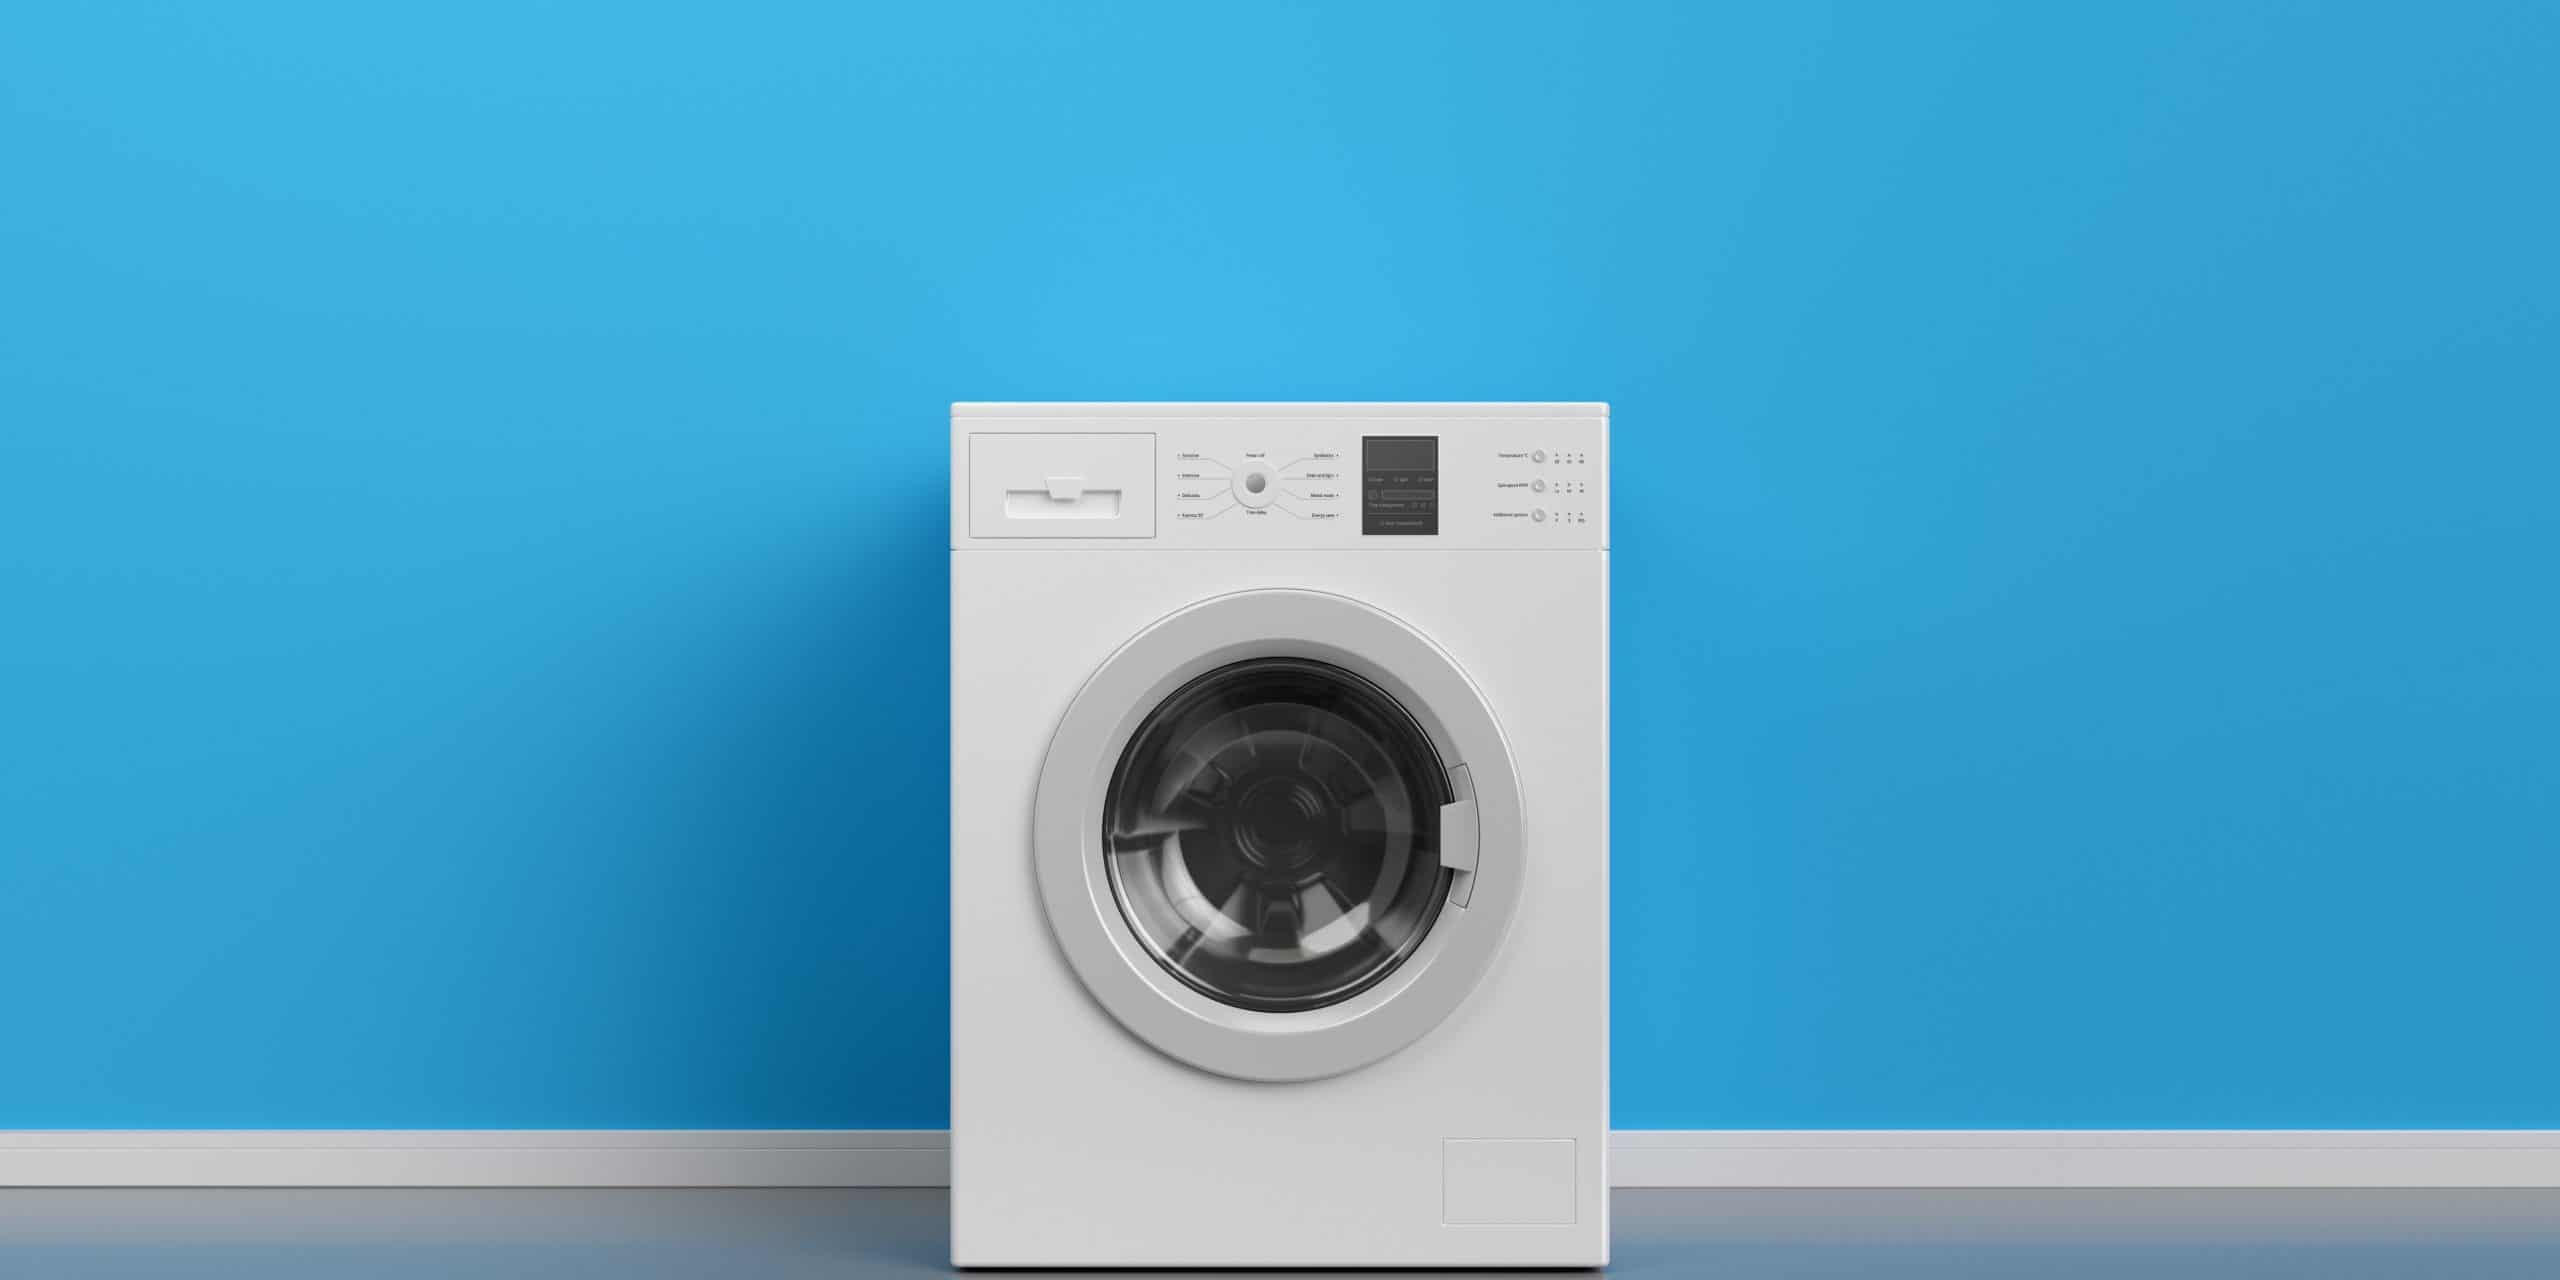 Washing Machine with a blue background